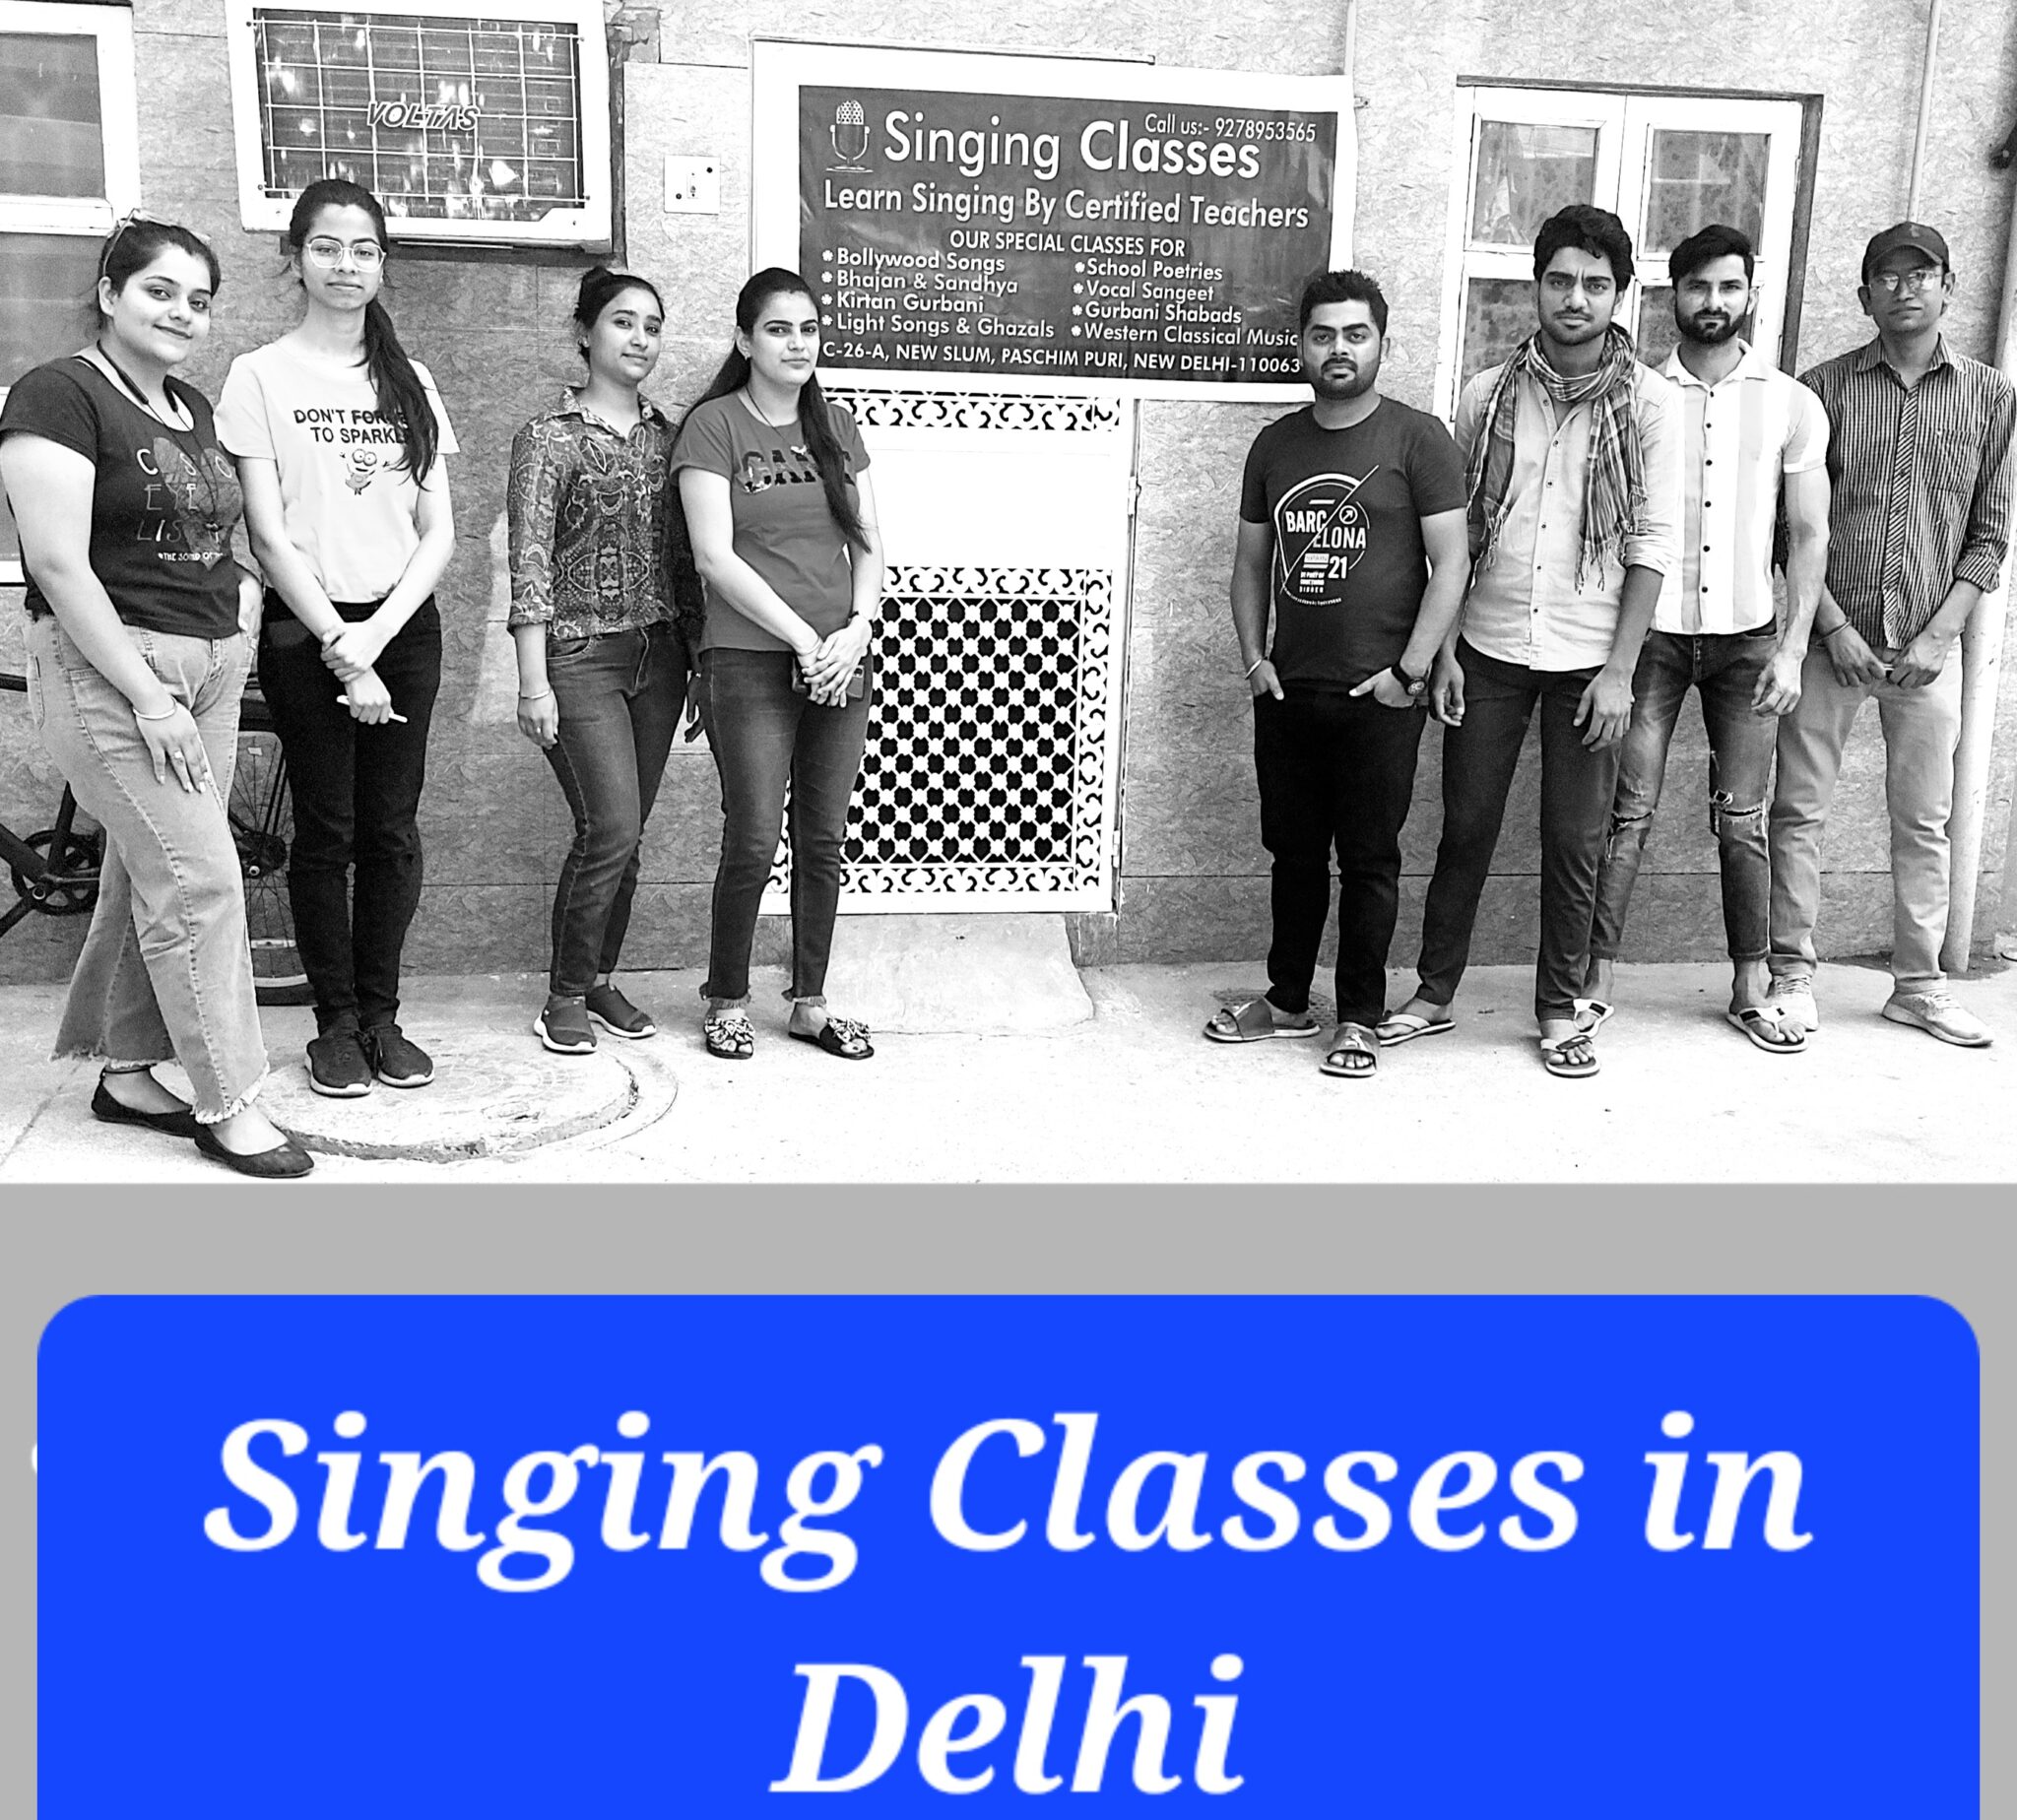 Students and teachers standing near Singing Classes in Delhi for daily vocal classes.